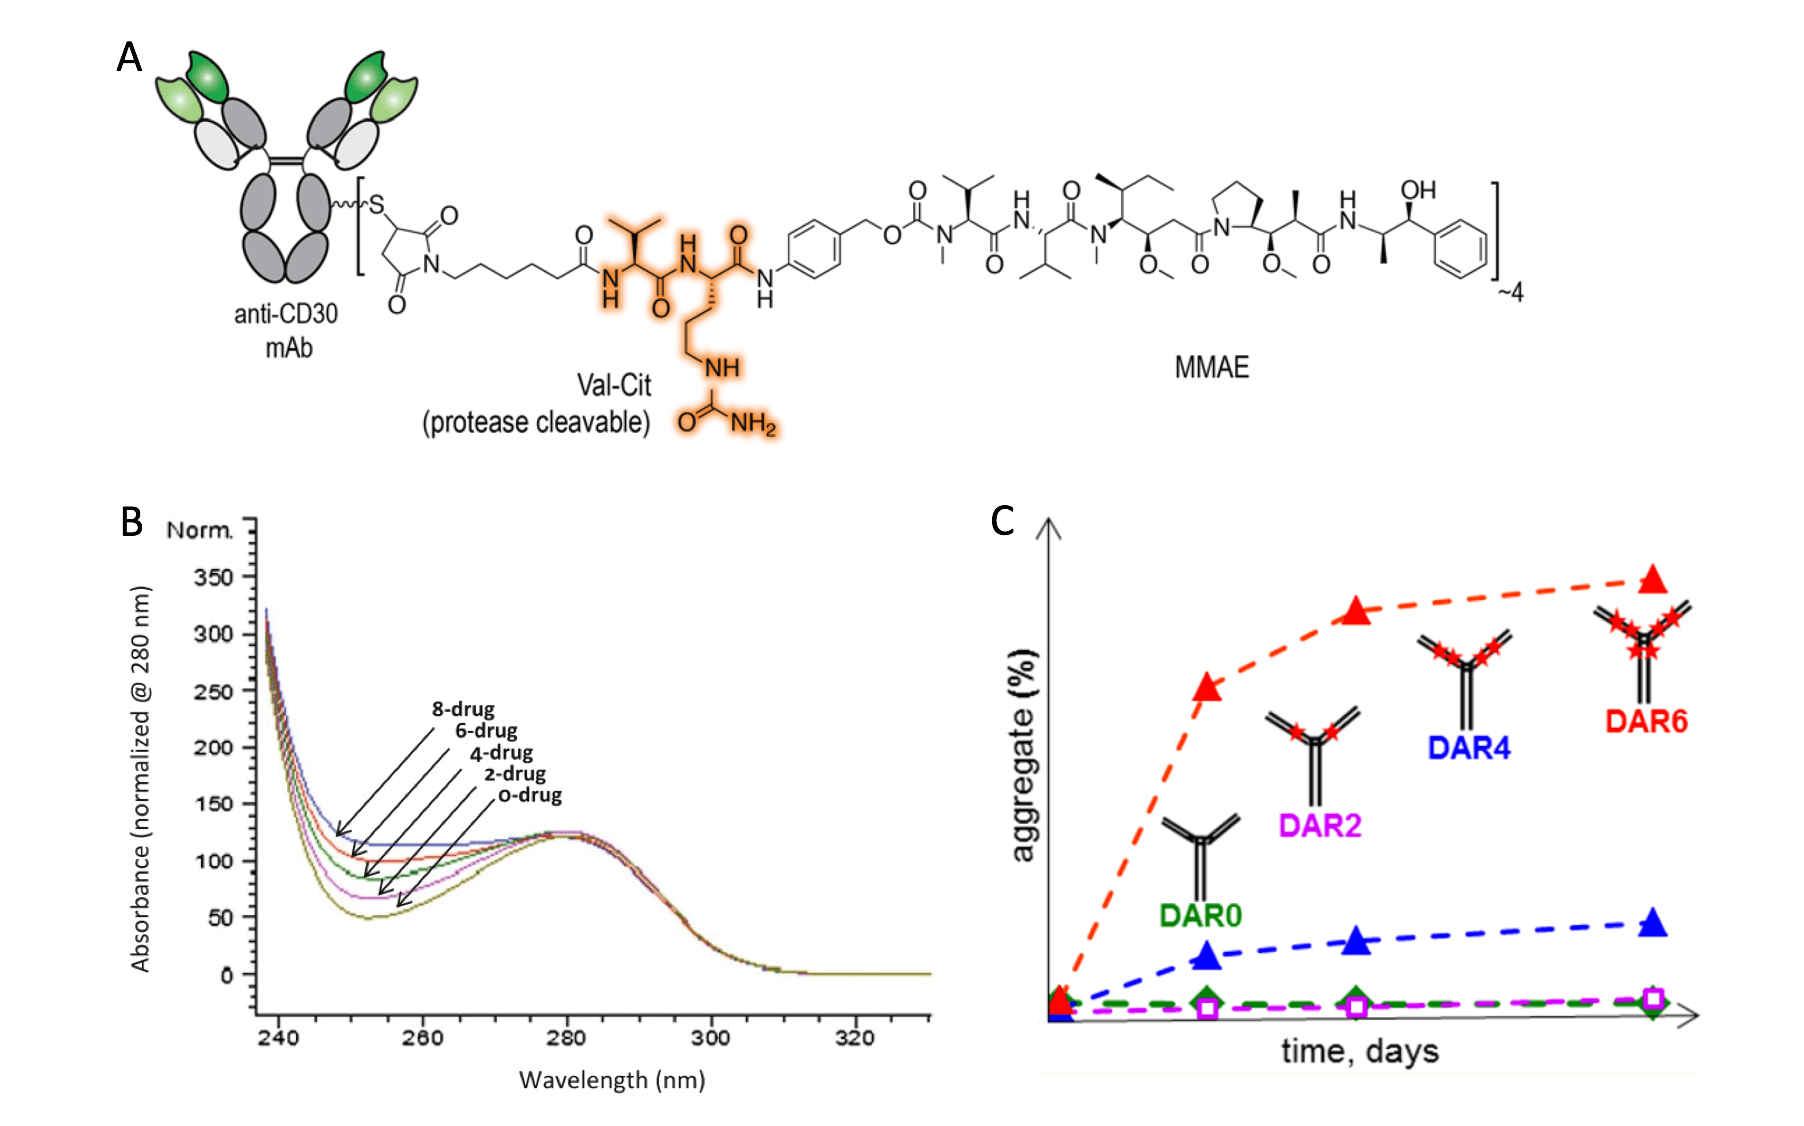 Biophysical and biochemical characterization of an ADC. (A) the structure of Brentuximab vedotin, an ADC formed by conjugation of an anti-CD30 antibody with MMAE via a vc peptide linker to the Cys residues (Chem. Sci., 2016); (B) UV spectra of drug-loaded species and DAR estimation (Antibody drug conjugates., 2013); (C) DAR affects the physical stability of an ADC by promoting aggregation in some cases ( Bioconjugate Chem., 2014)